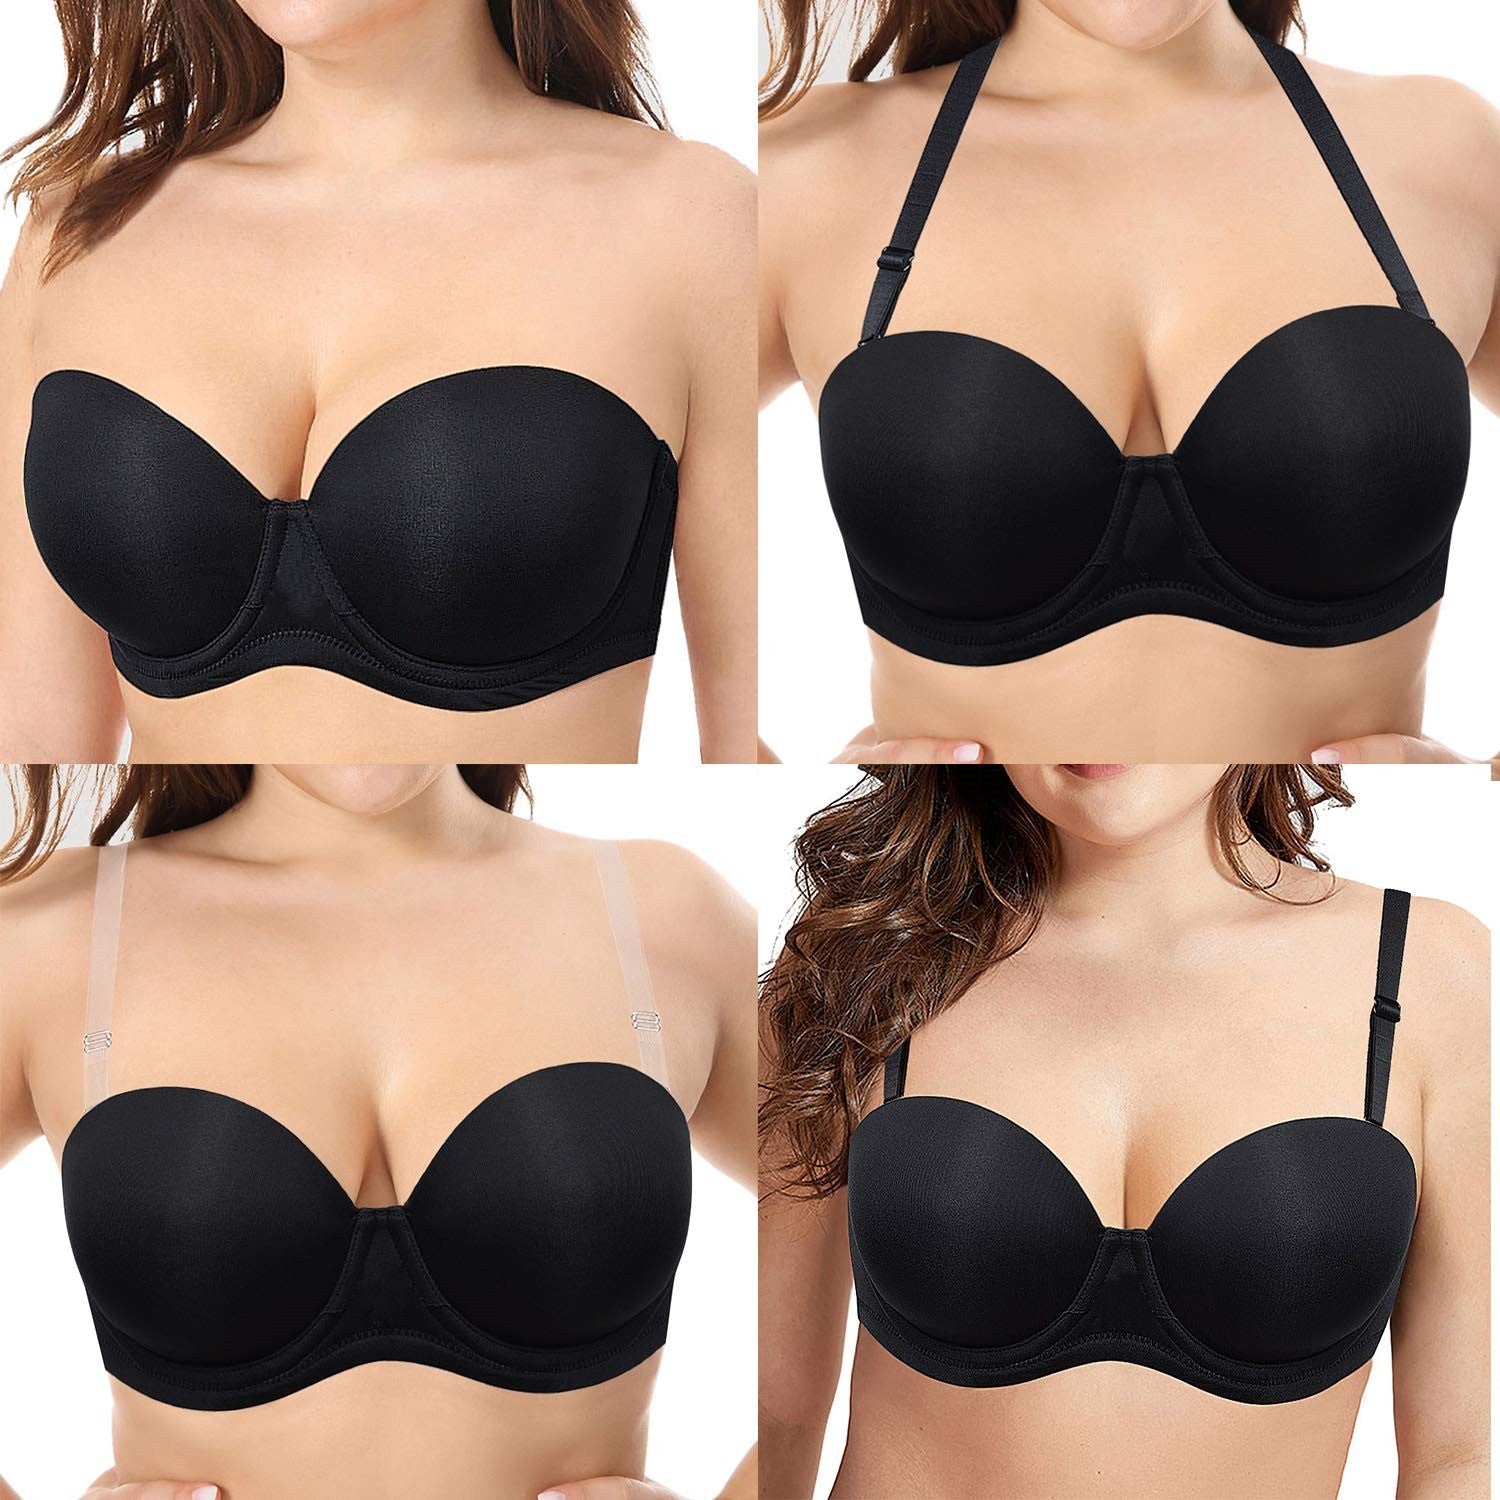  Best Bras for Big Busts, Best Strapless Push Up Bra, Cami Bras,  Plus Size Lace Bralette, Most Comfortable Bra for Plus Size, Gray Bras,  Women with No Bra, 2022/Bras Bra, Sports